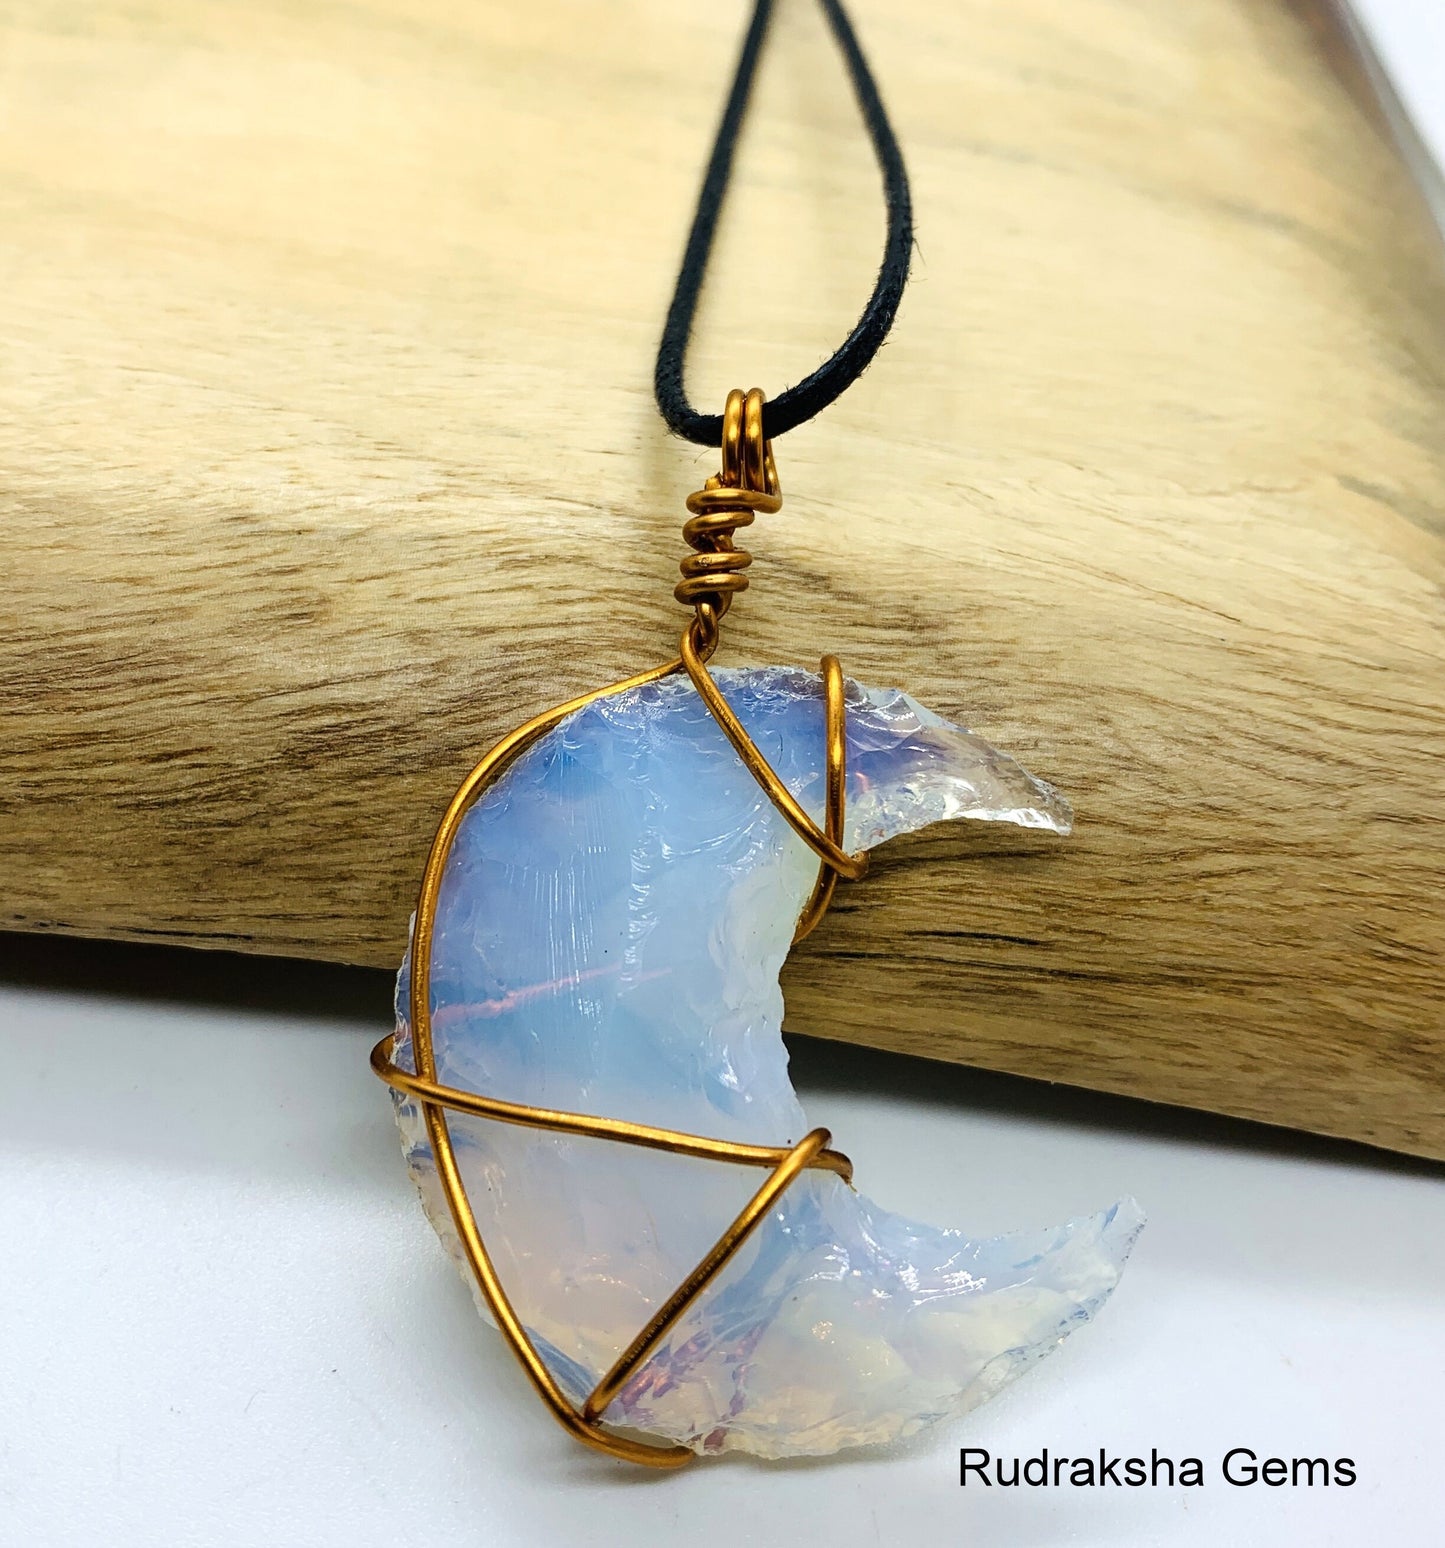 Opal Moon Pendant, Opalite Crystal, Opalite Necklace, Wire Wrapped Copper Pendant, Boho Jewelry, Reiki Energy Charged Crystal pendant